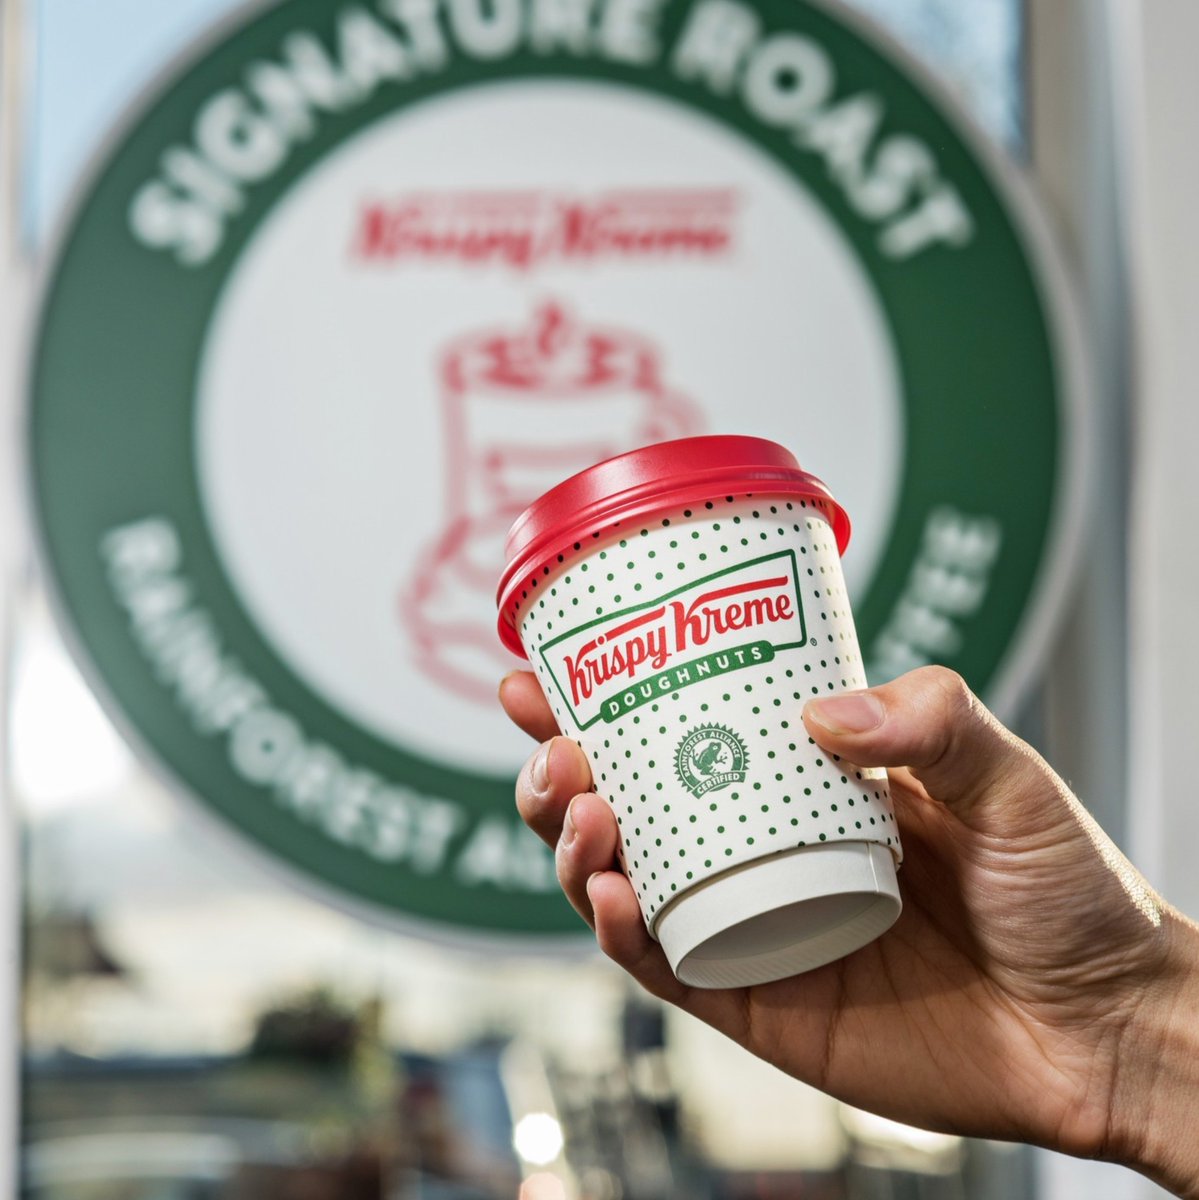 Got those pre-Monday blues at the thought of work again tomorrow? Well here's something to look forward to! ☕️ Grab a coffee & Original Glazed doughnut from @krispykremeuk for only £3 when you scan your Rewards card! 🙌 You are welcome! 🍩 #KrispyKreme #CoffeeAndDoughnut